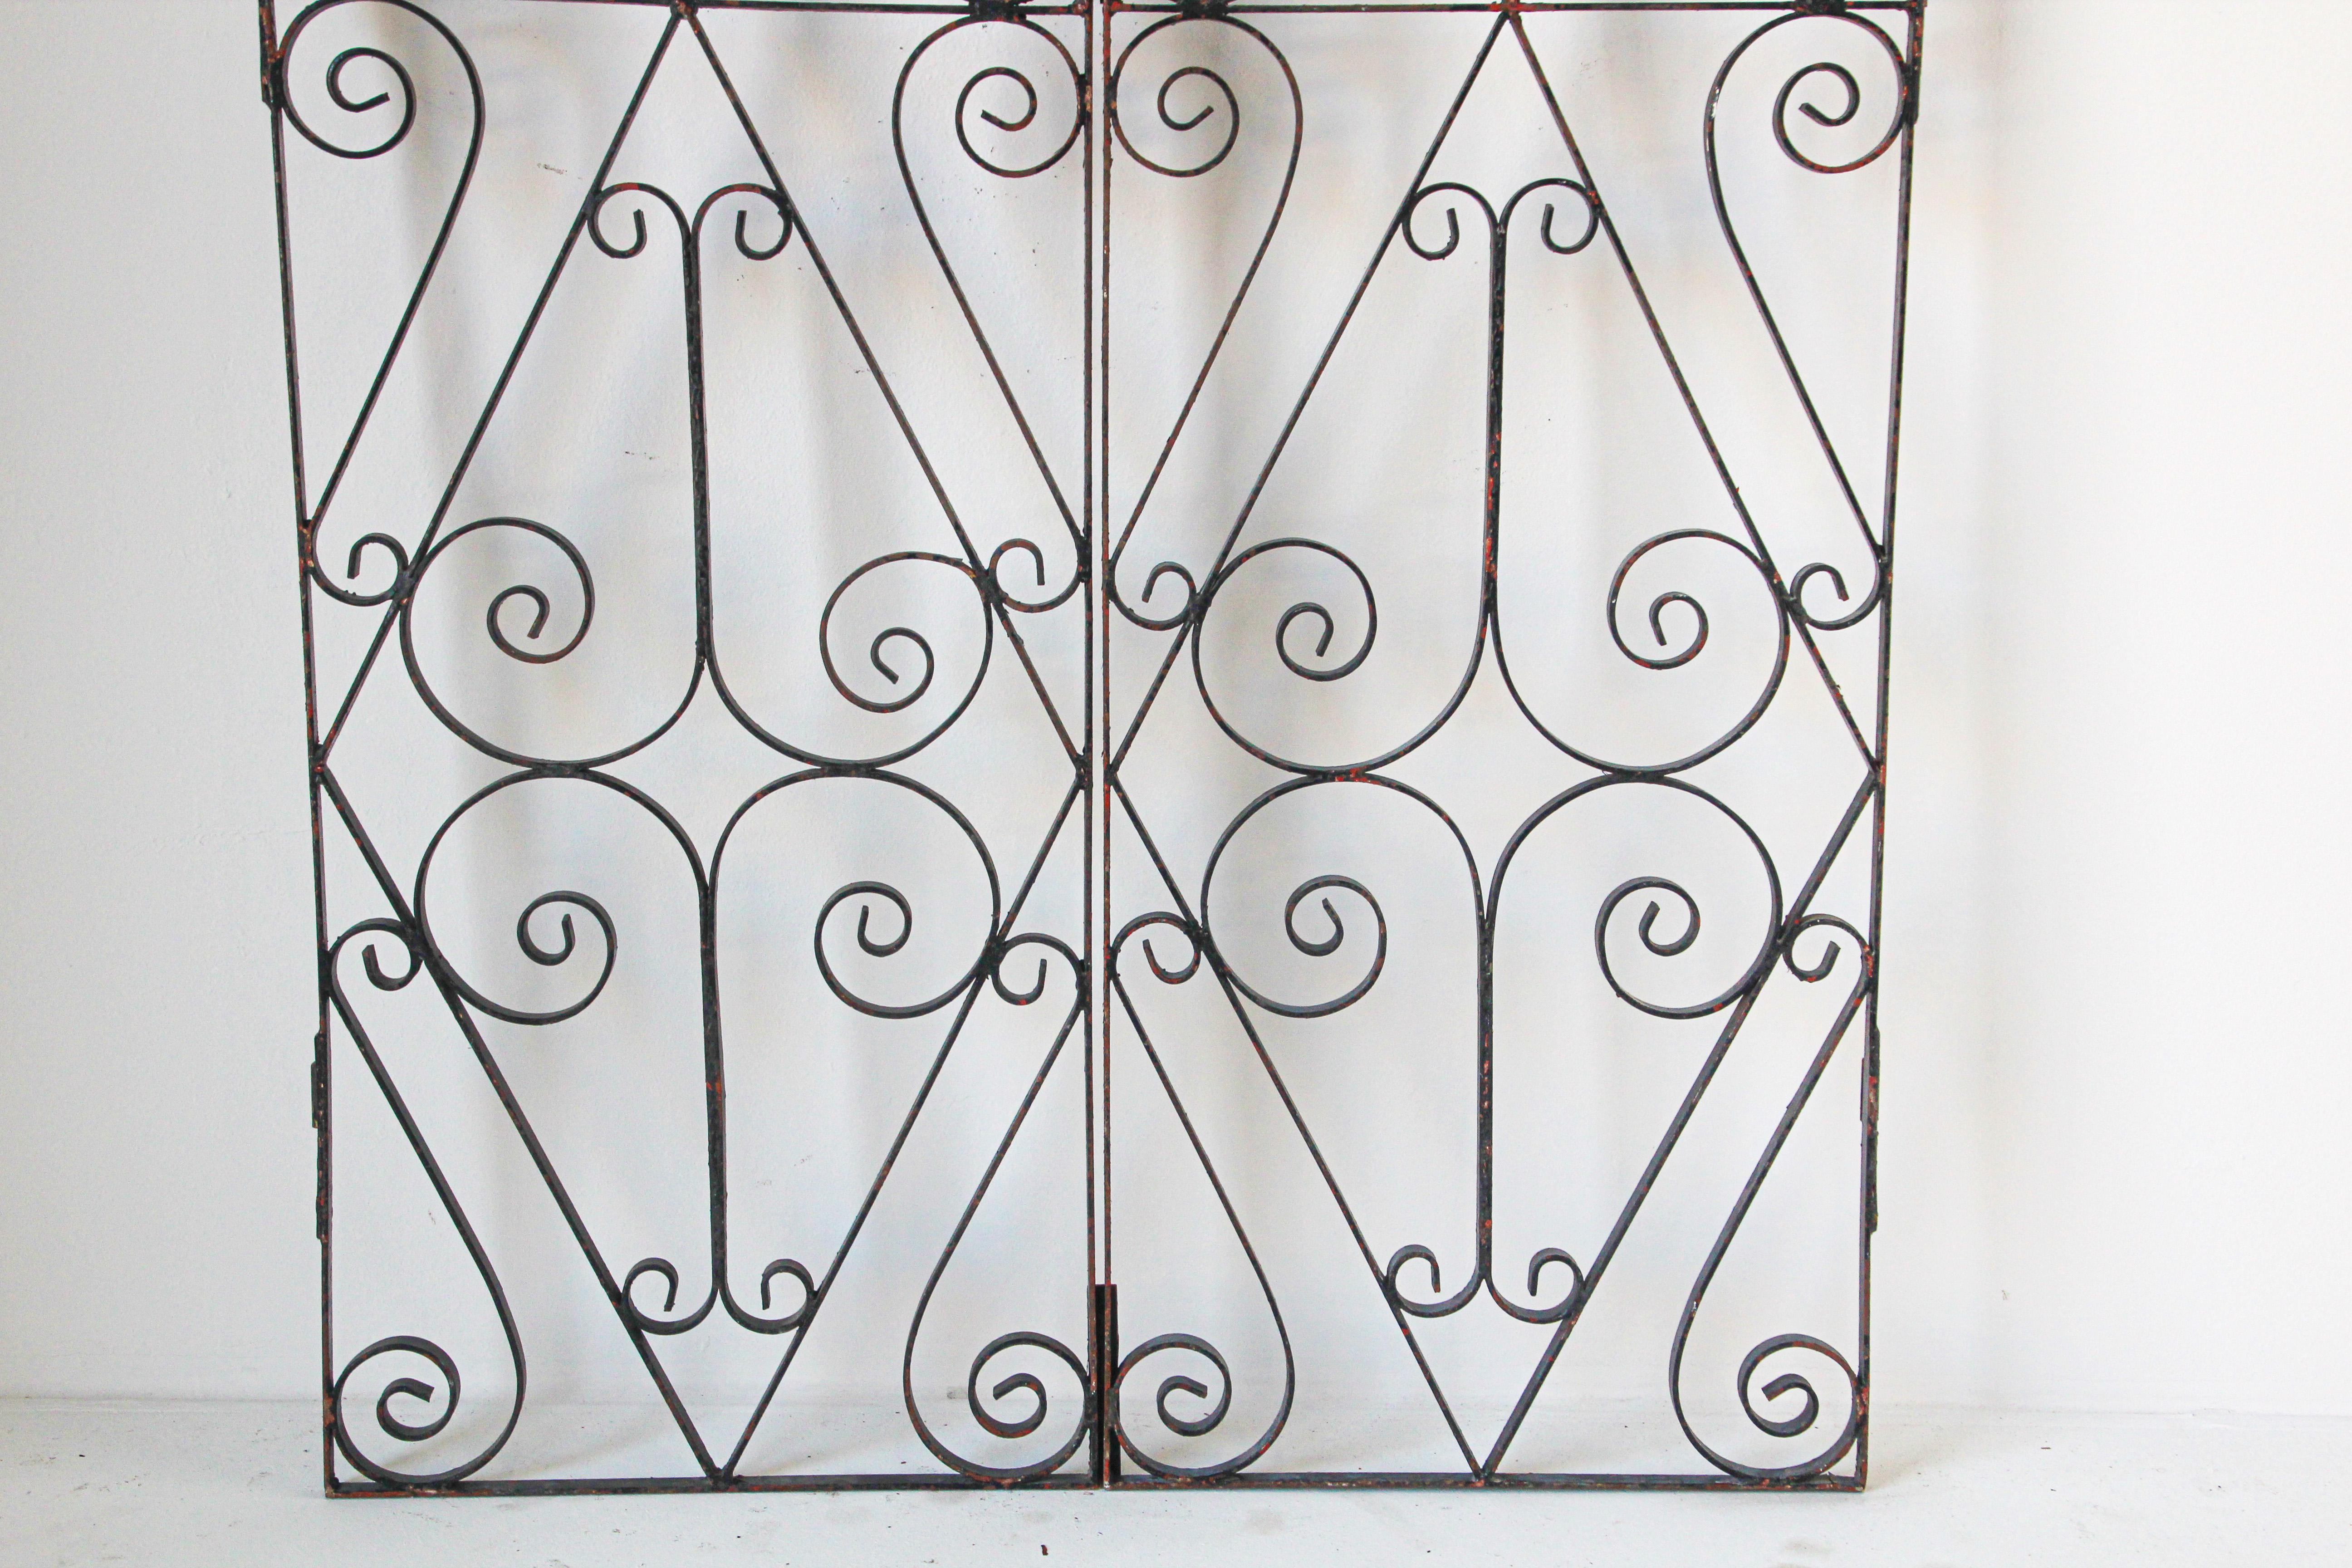 Antique French wrought iron garden gate, double doors.
A pair of good quality wrought iron gates with flowing scroll design.
All hinge eyes present.
Each door measure 20.75